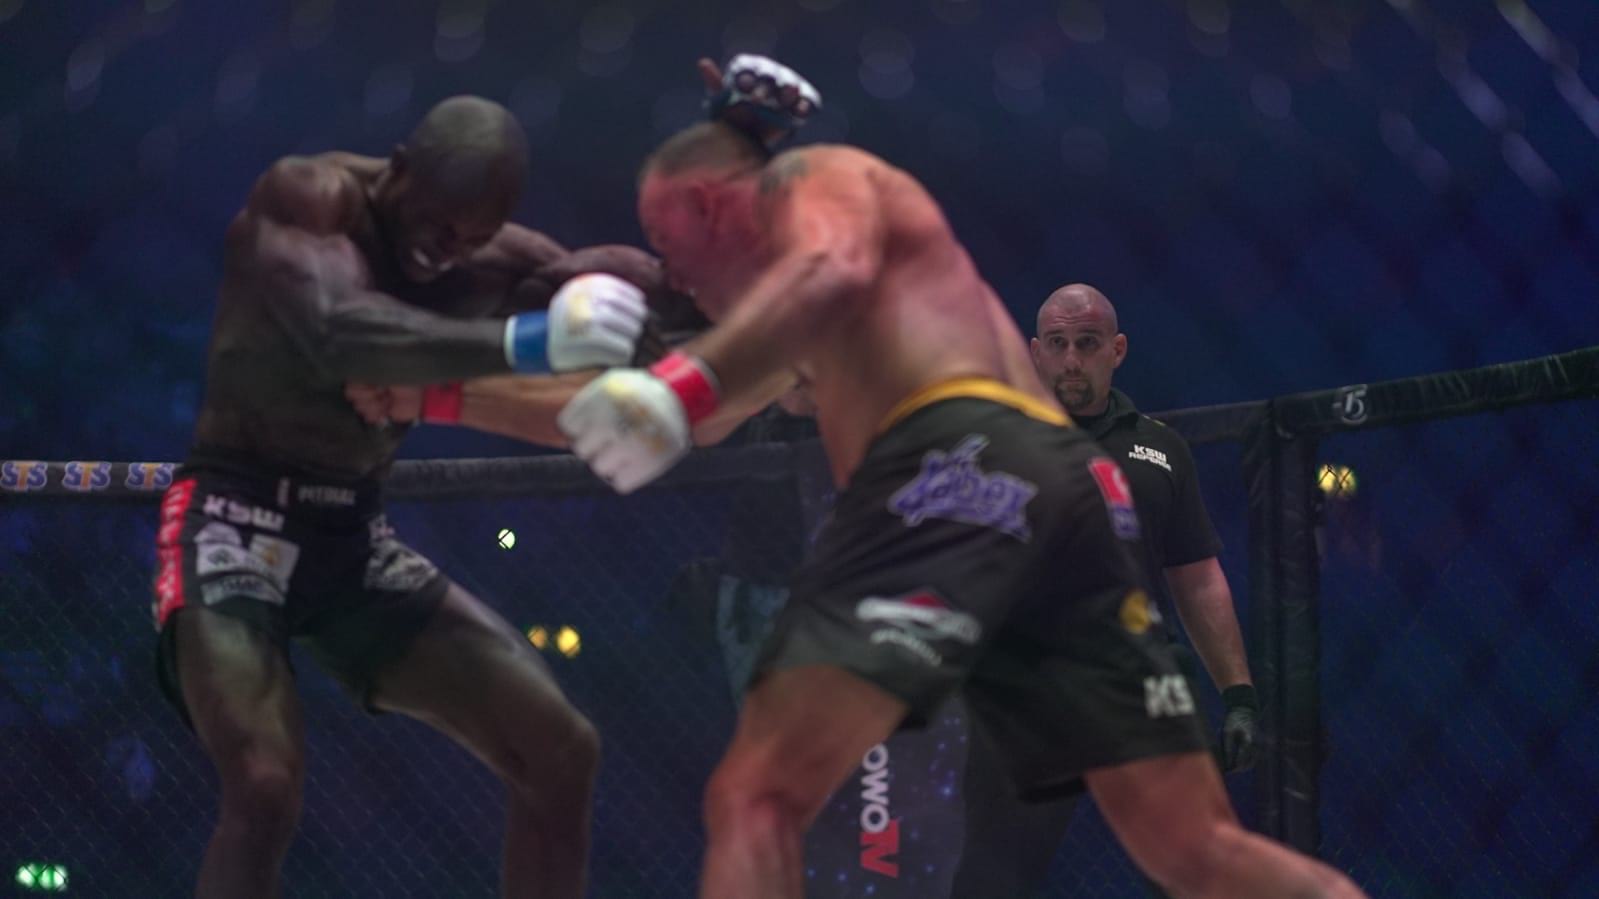 Jason Radcliffe defeated Antoni Chmieleski at KSW 50 in London by unanimous decision